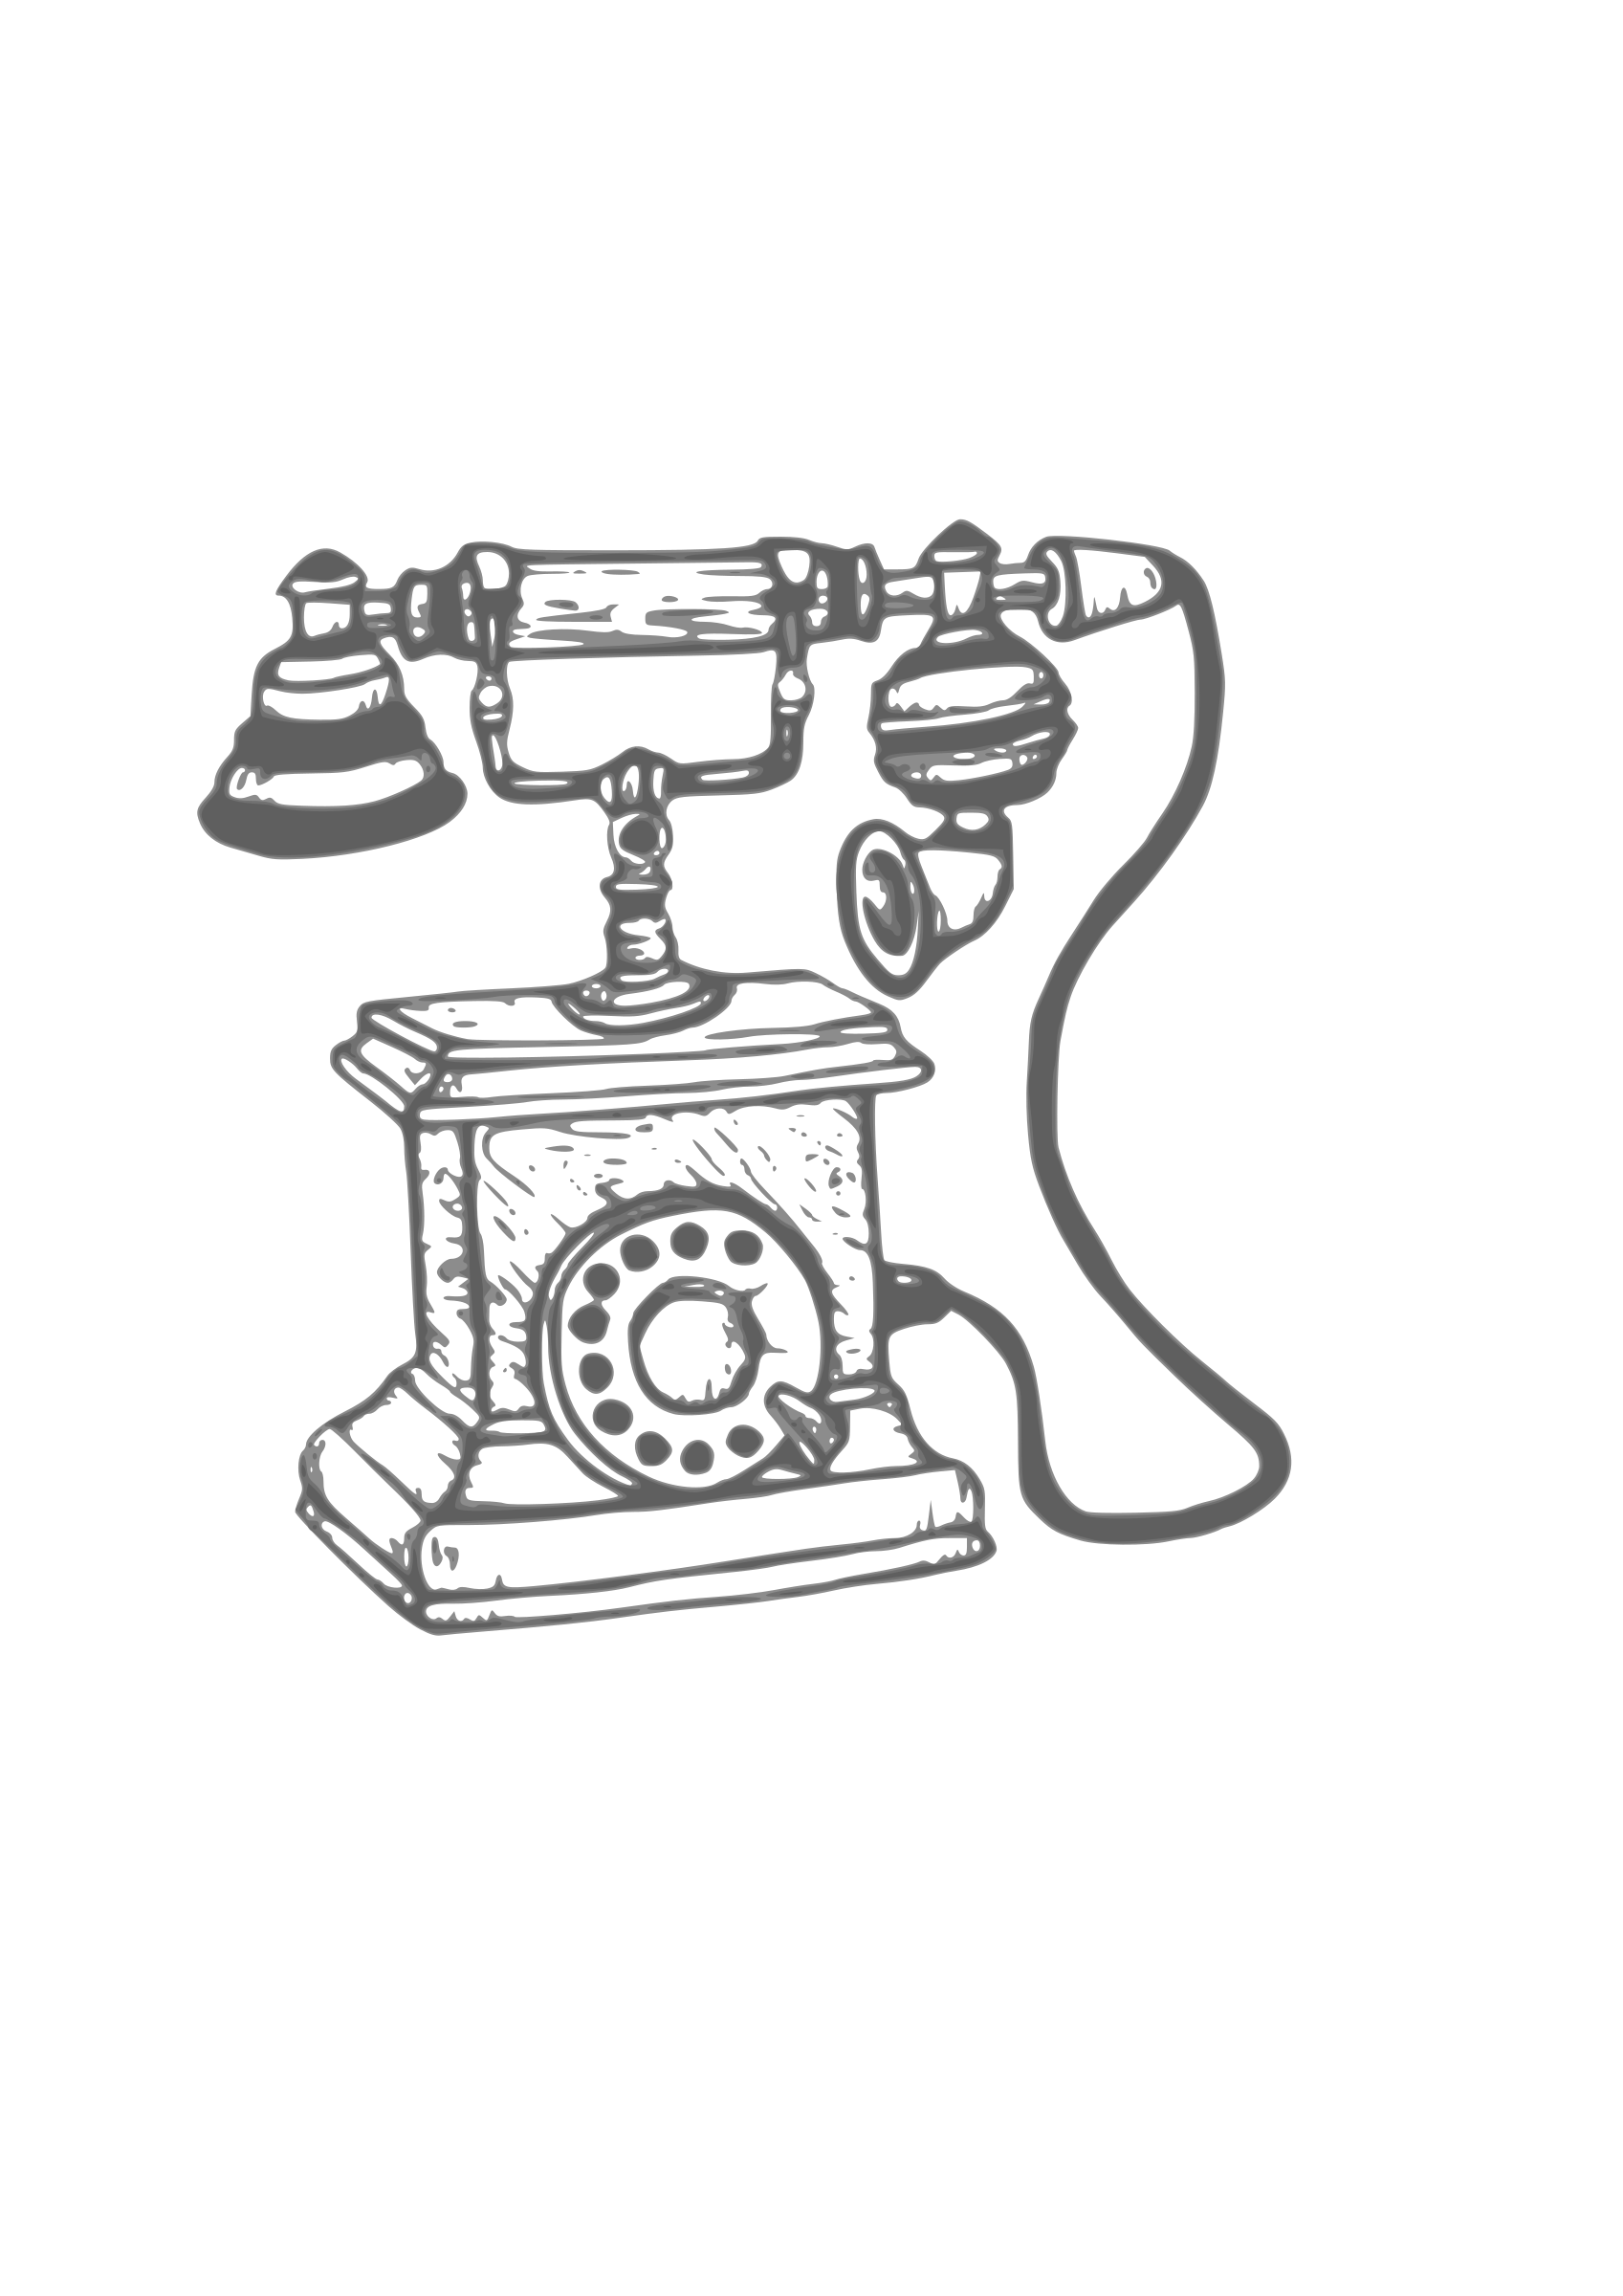 Telephone clipart line drawing. Old phone big image